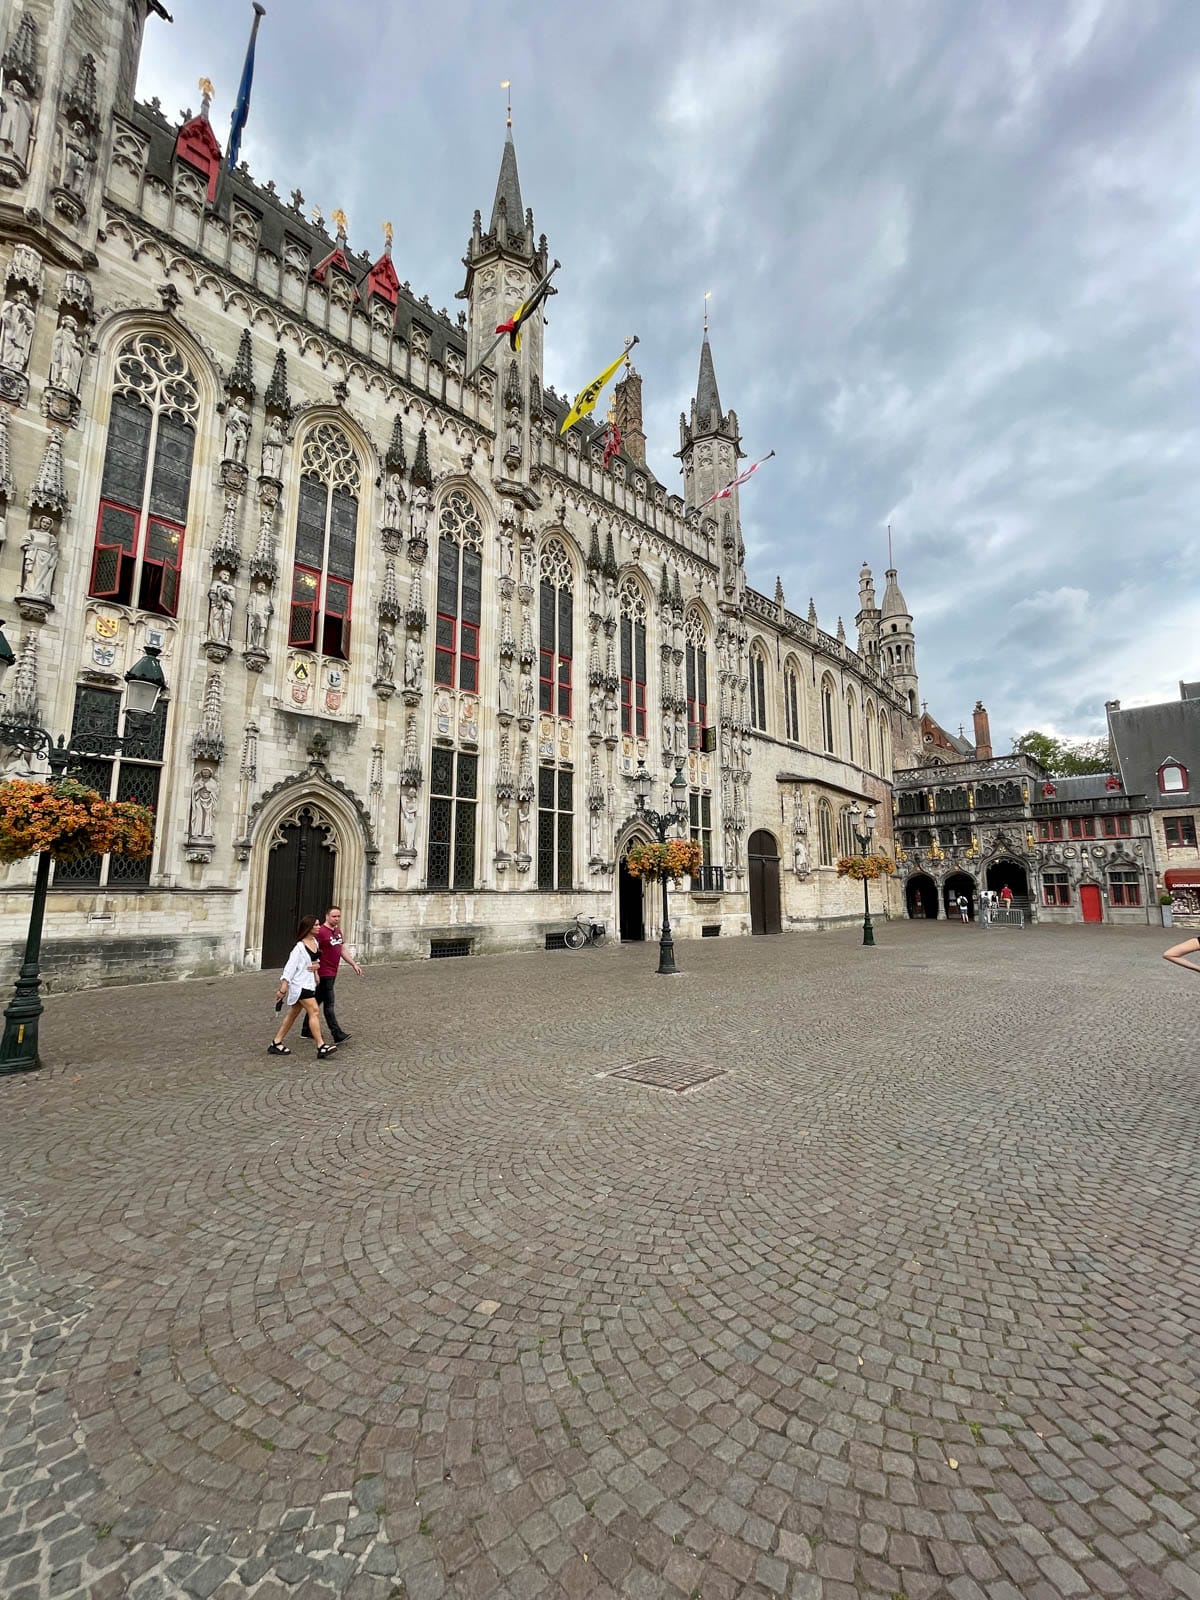 Gothic style buildings in Bruges.